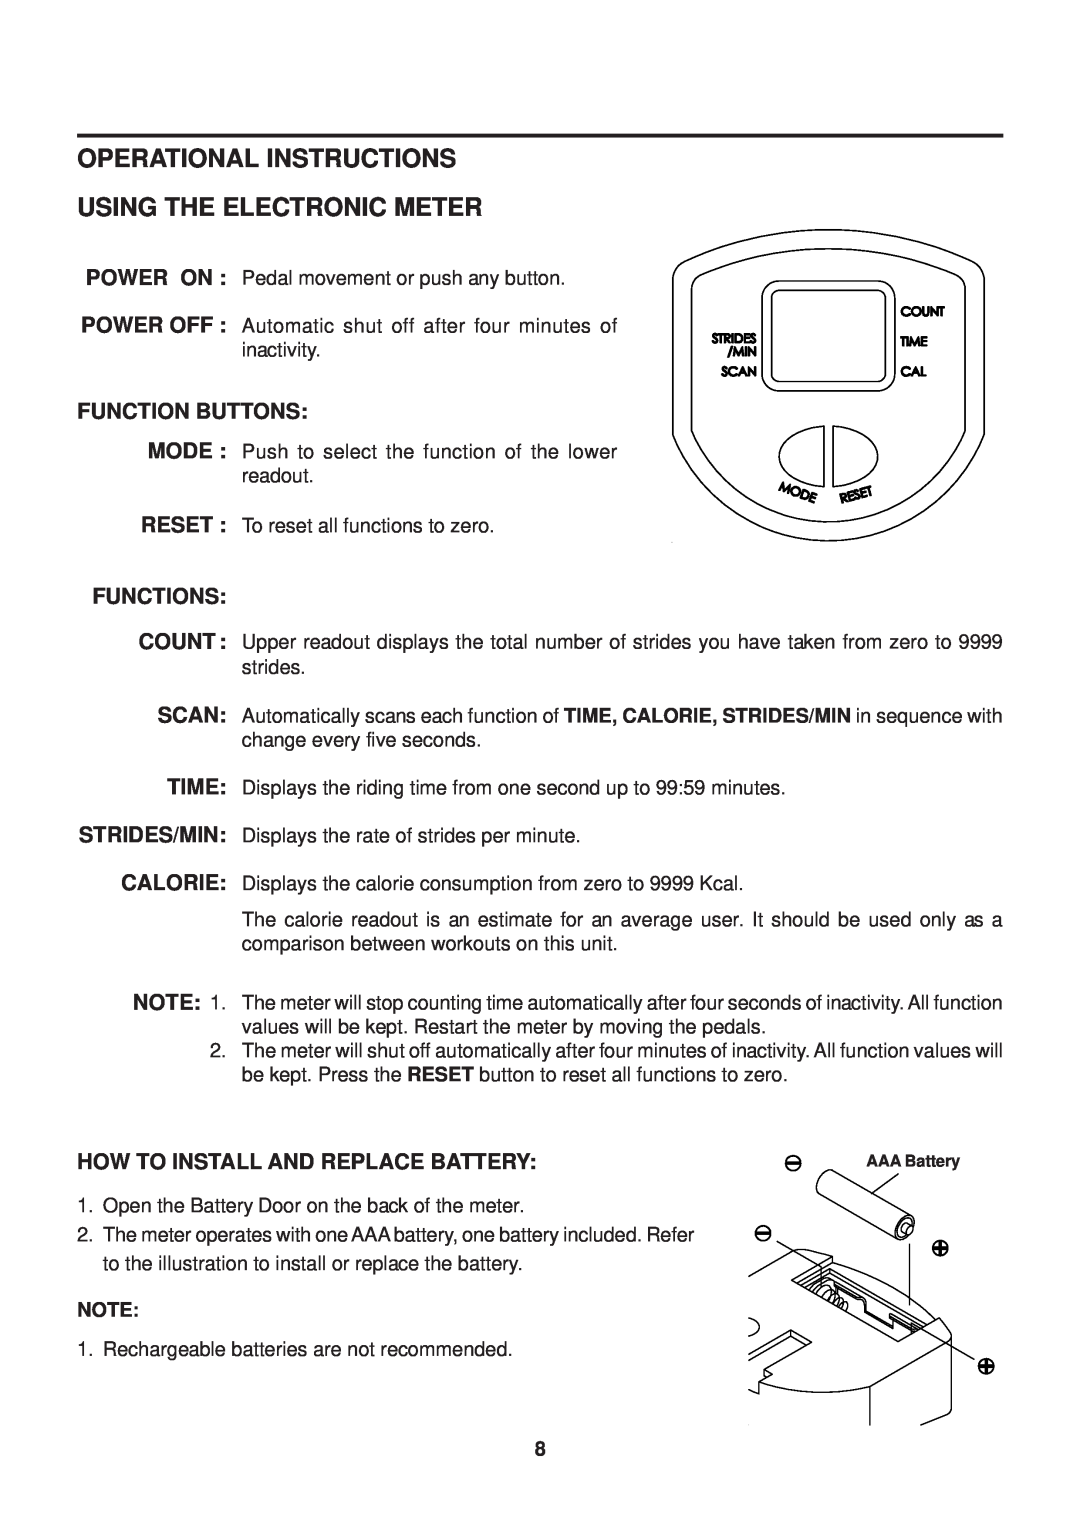 Stamina Products 40-0046A owner manual Operational Instructions Using The Electronic Meter, Function Buttons, Functions 